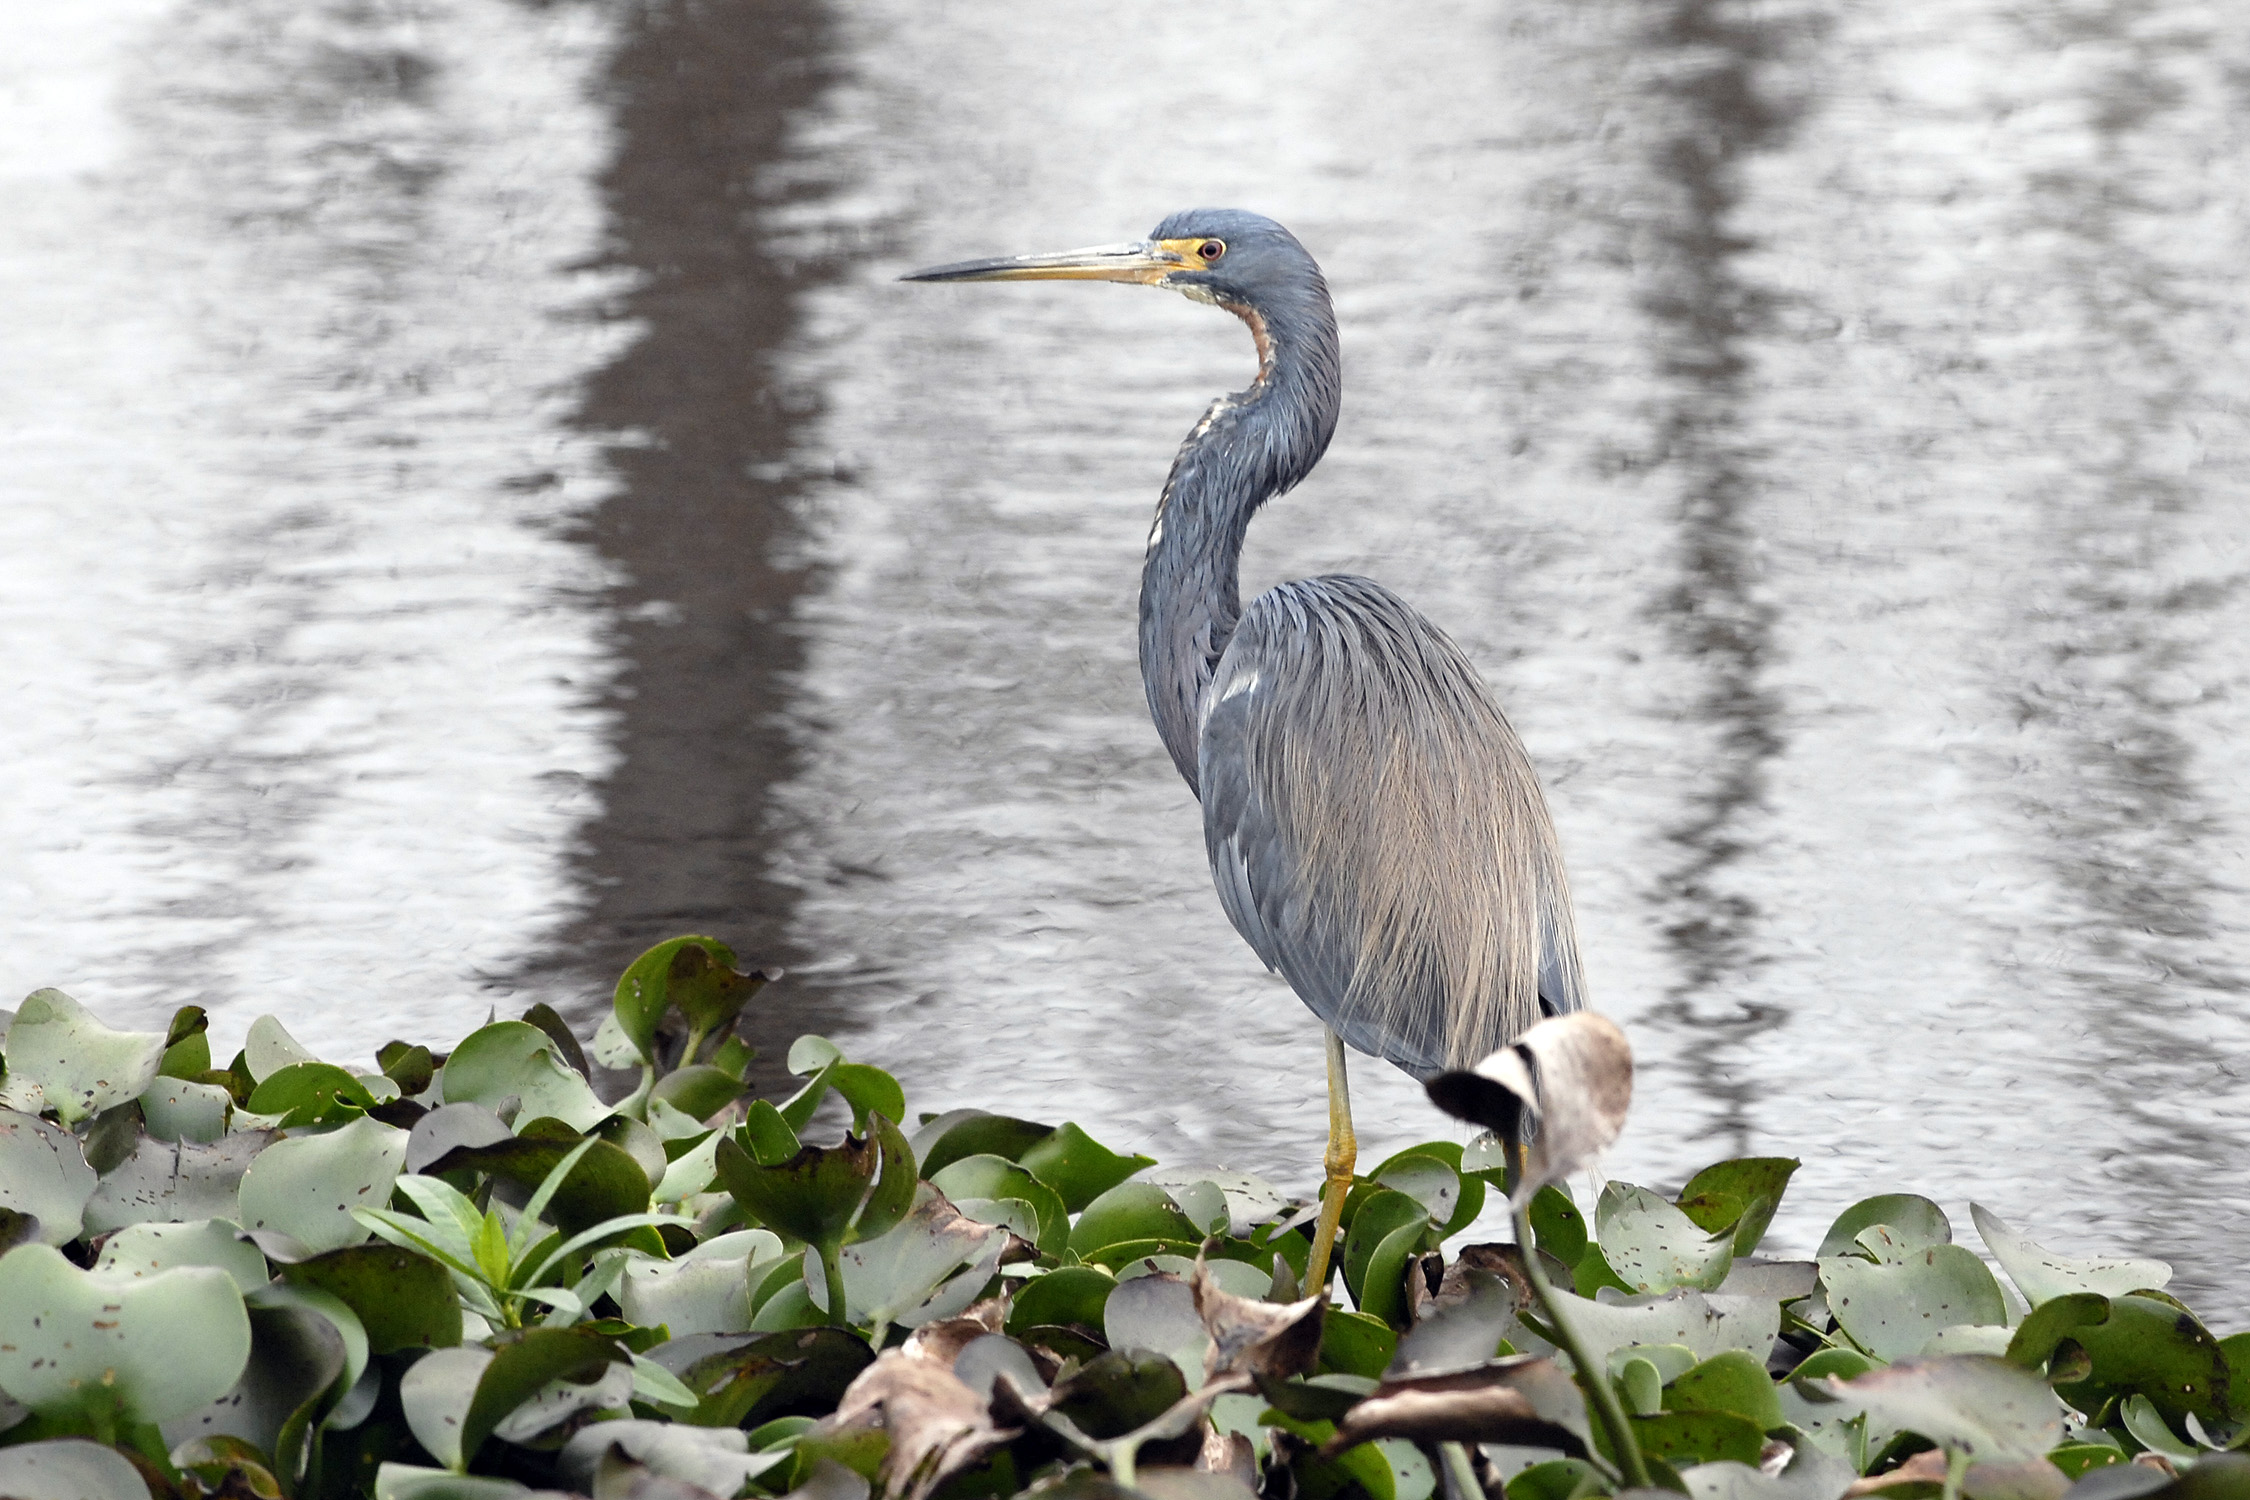 A blue heron standing in the water.